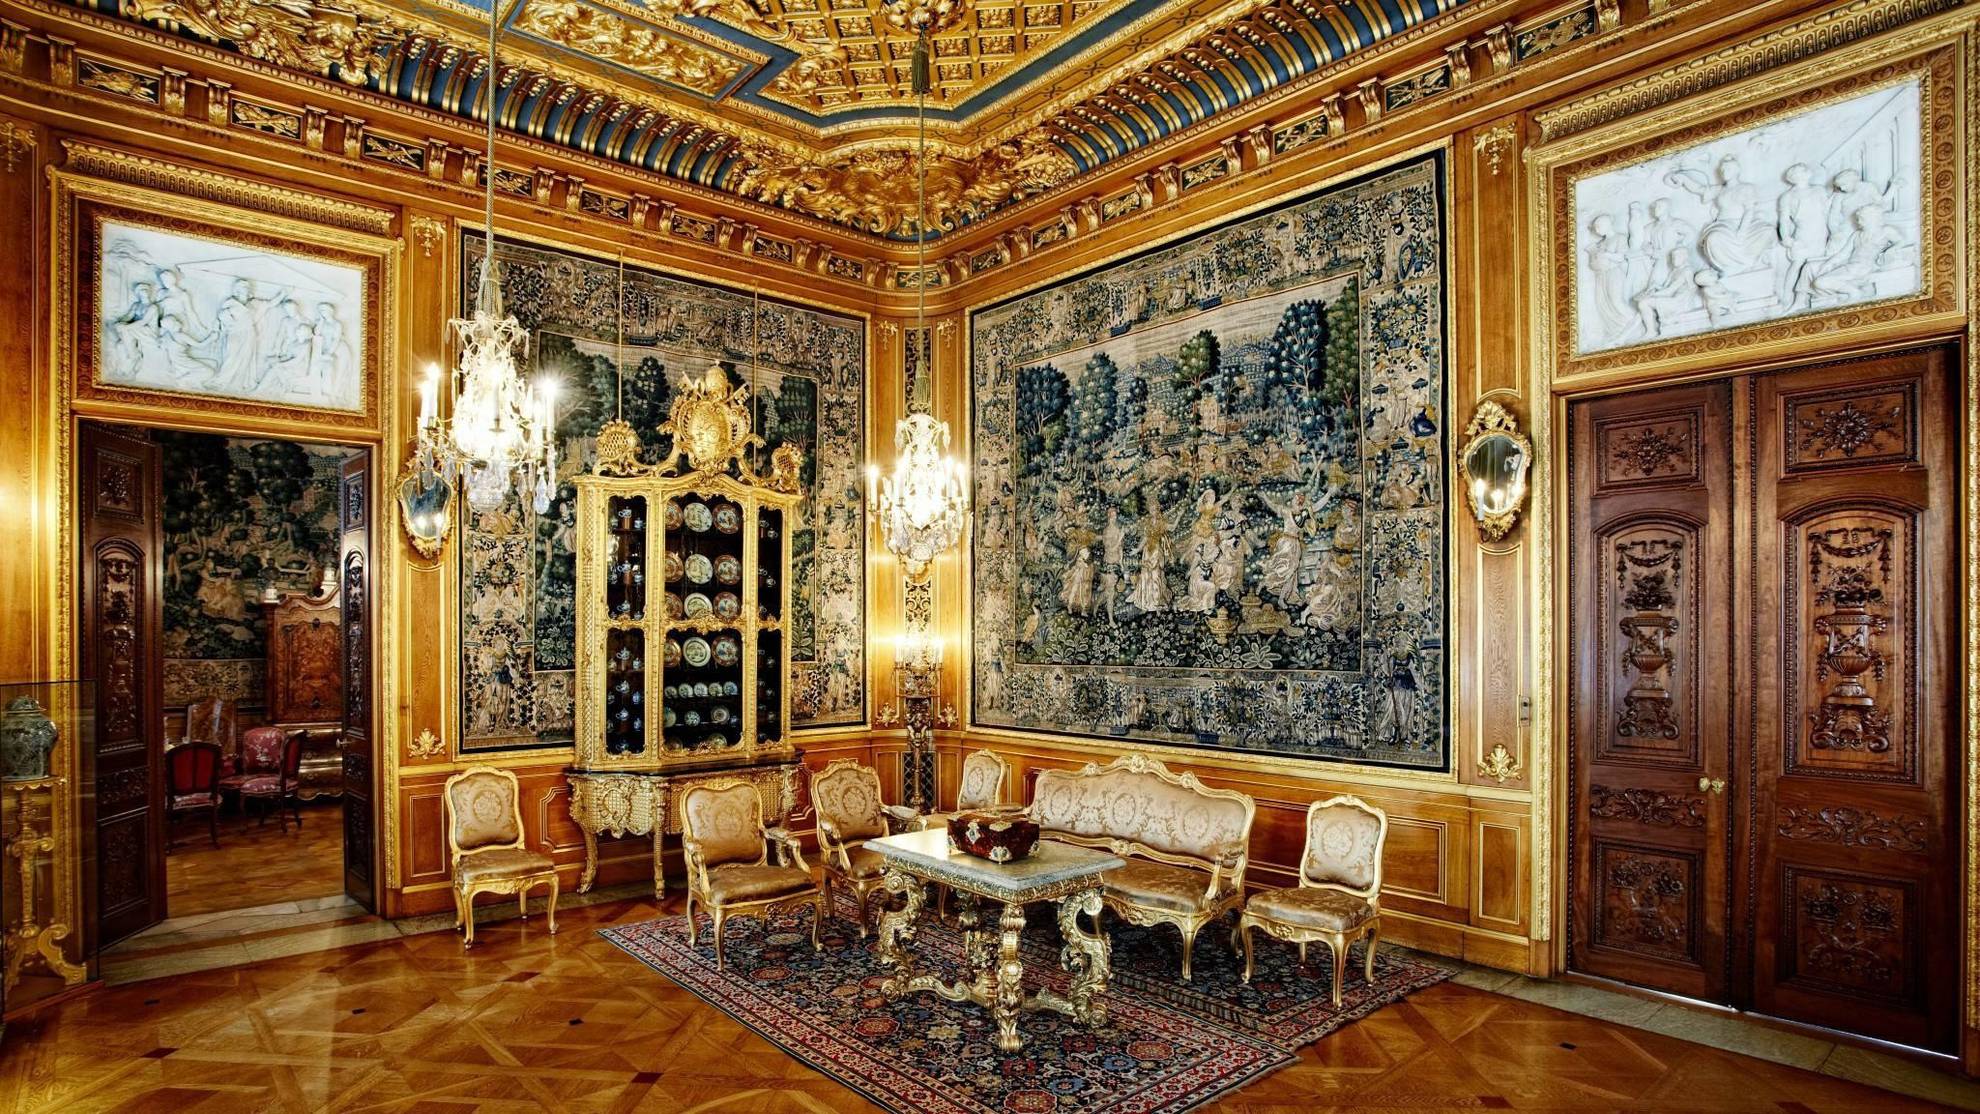 The luxurious, golden sitting room of Hallwyl house; with large paintings, golden furniture and chandeliers.